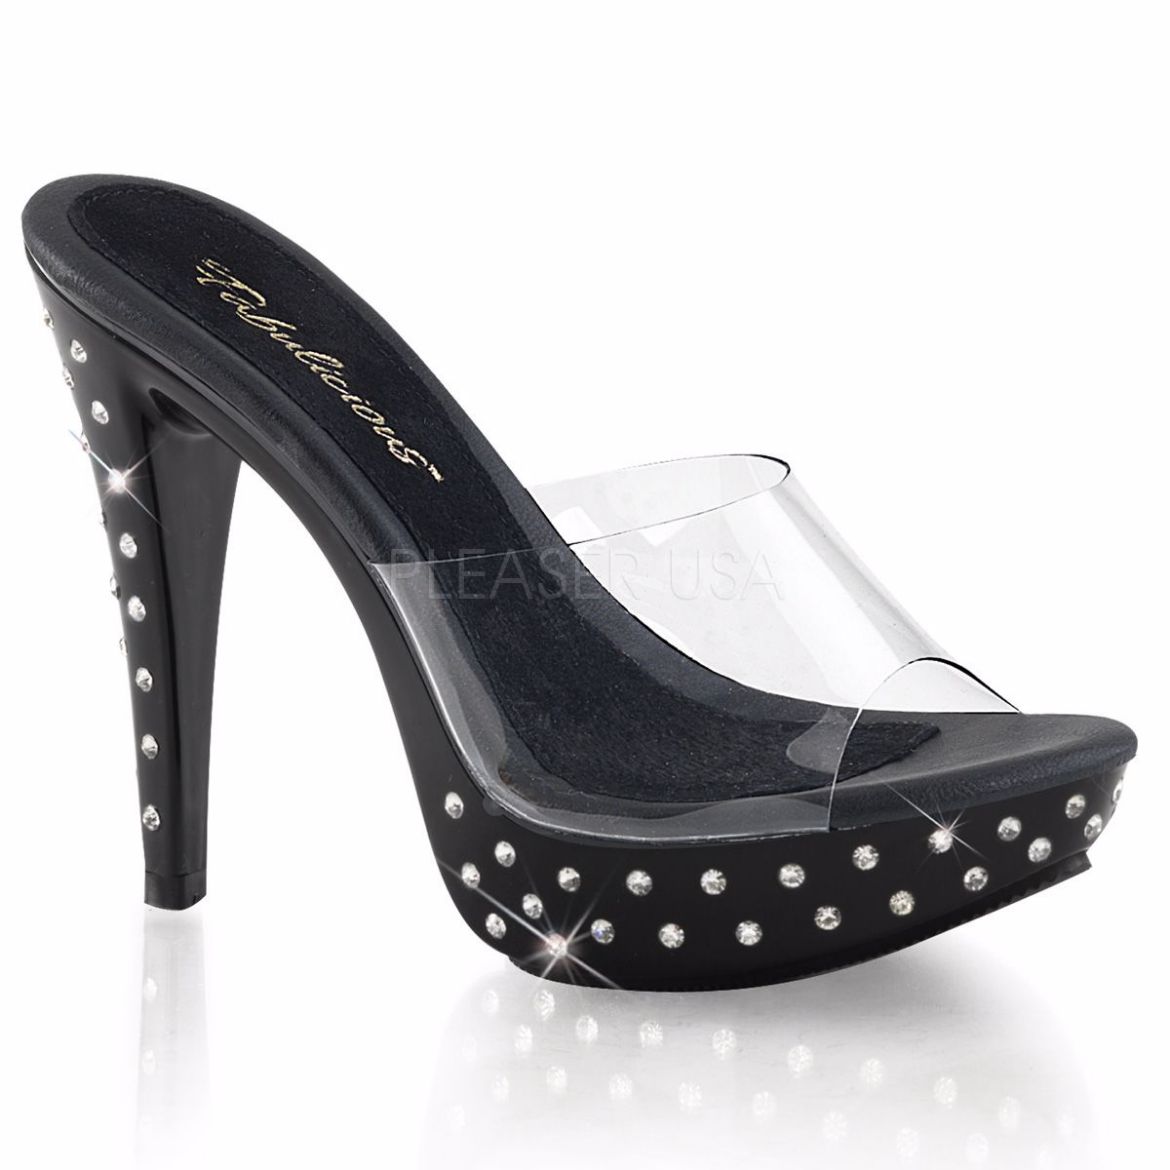 Product image of Fabulicious Cocktail-501Sdt Clear/Black, 5 inch (12.7 cm) Heel, 1 inch (2.5 cm) Platform Slide Mule Shoes